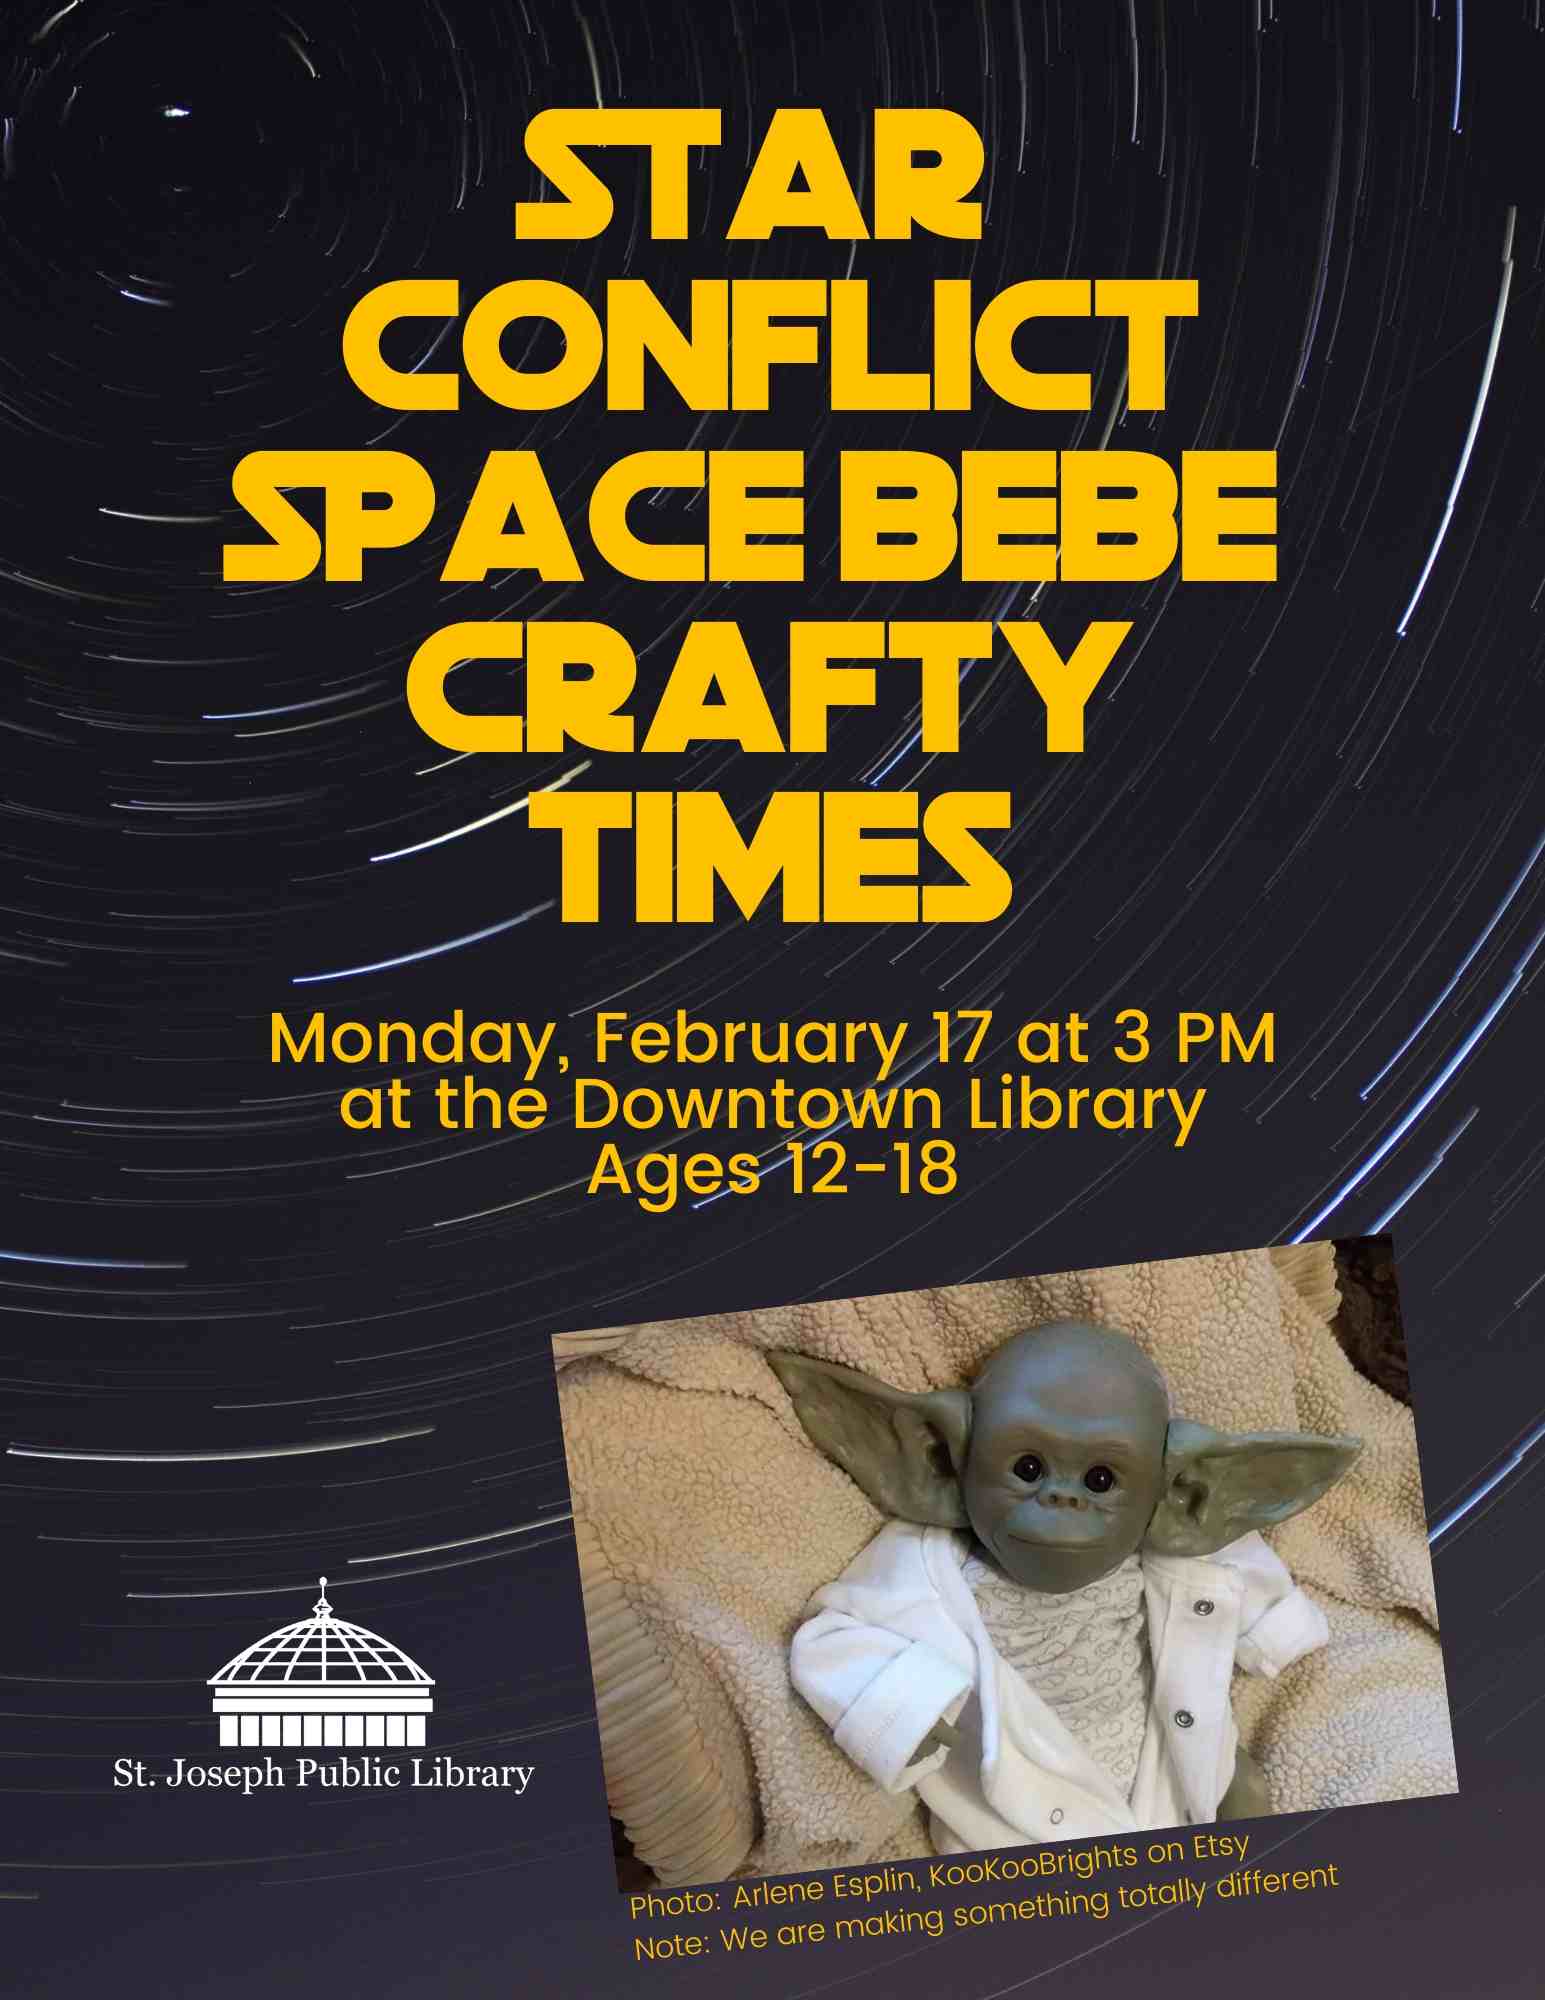 A knock off baby Yoda is accompanied by the text Star Conflict Space Bebe Crafty Times, the SJPL logo, and the date/time/location of the event.